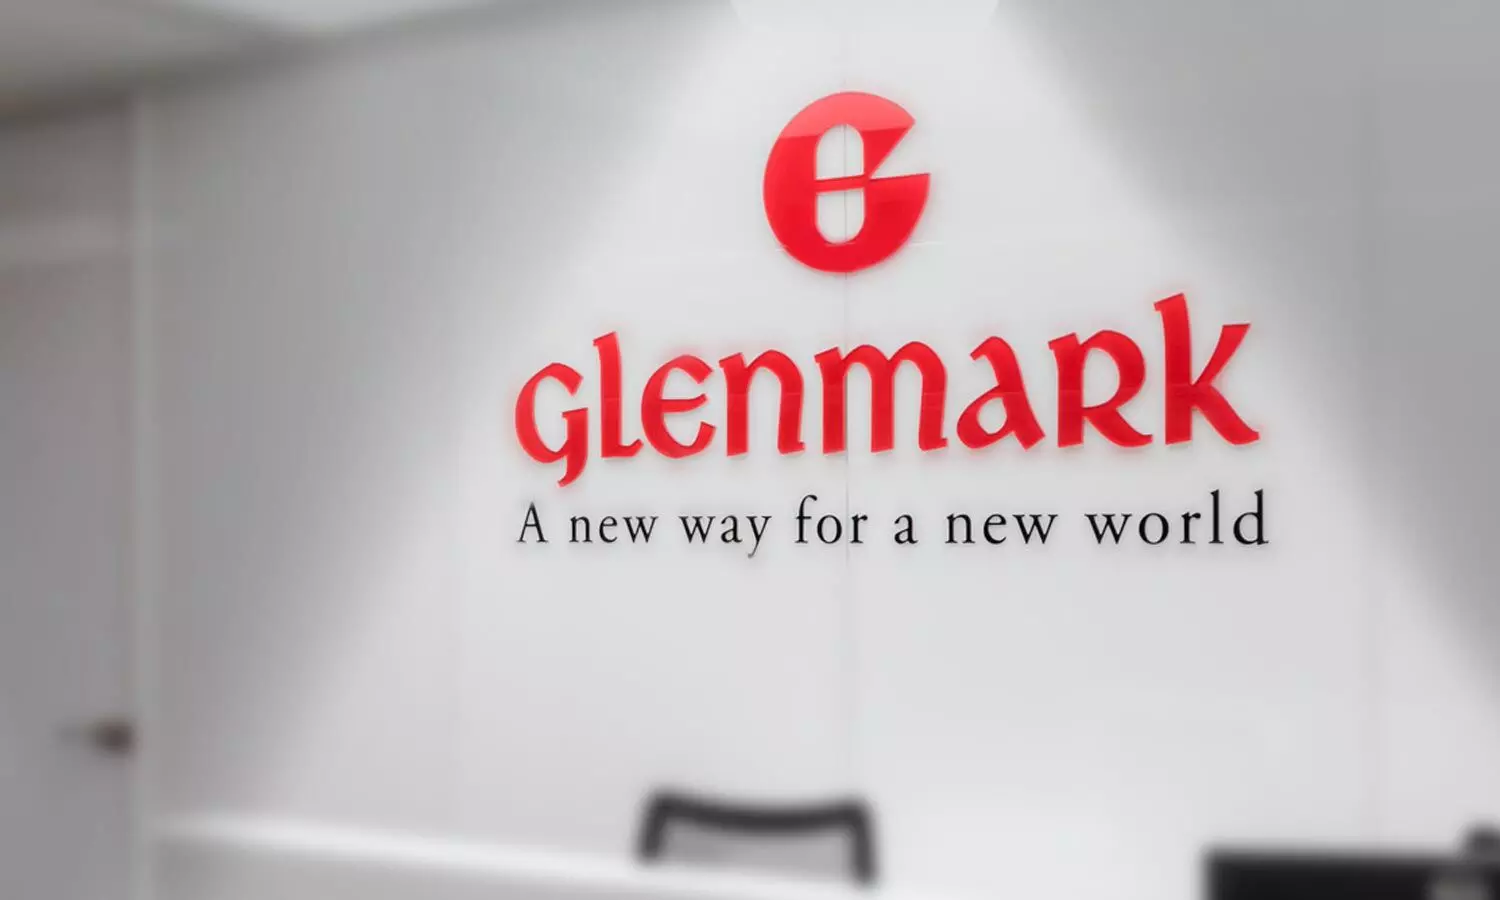 Glenmark Ryaltris-AZ launched at breakthrough price of Rs 175 per pack in India